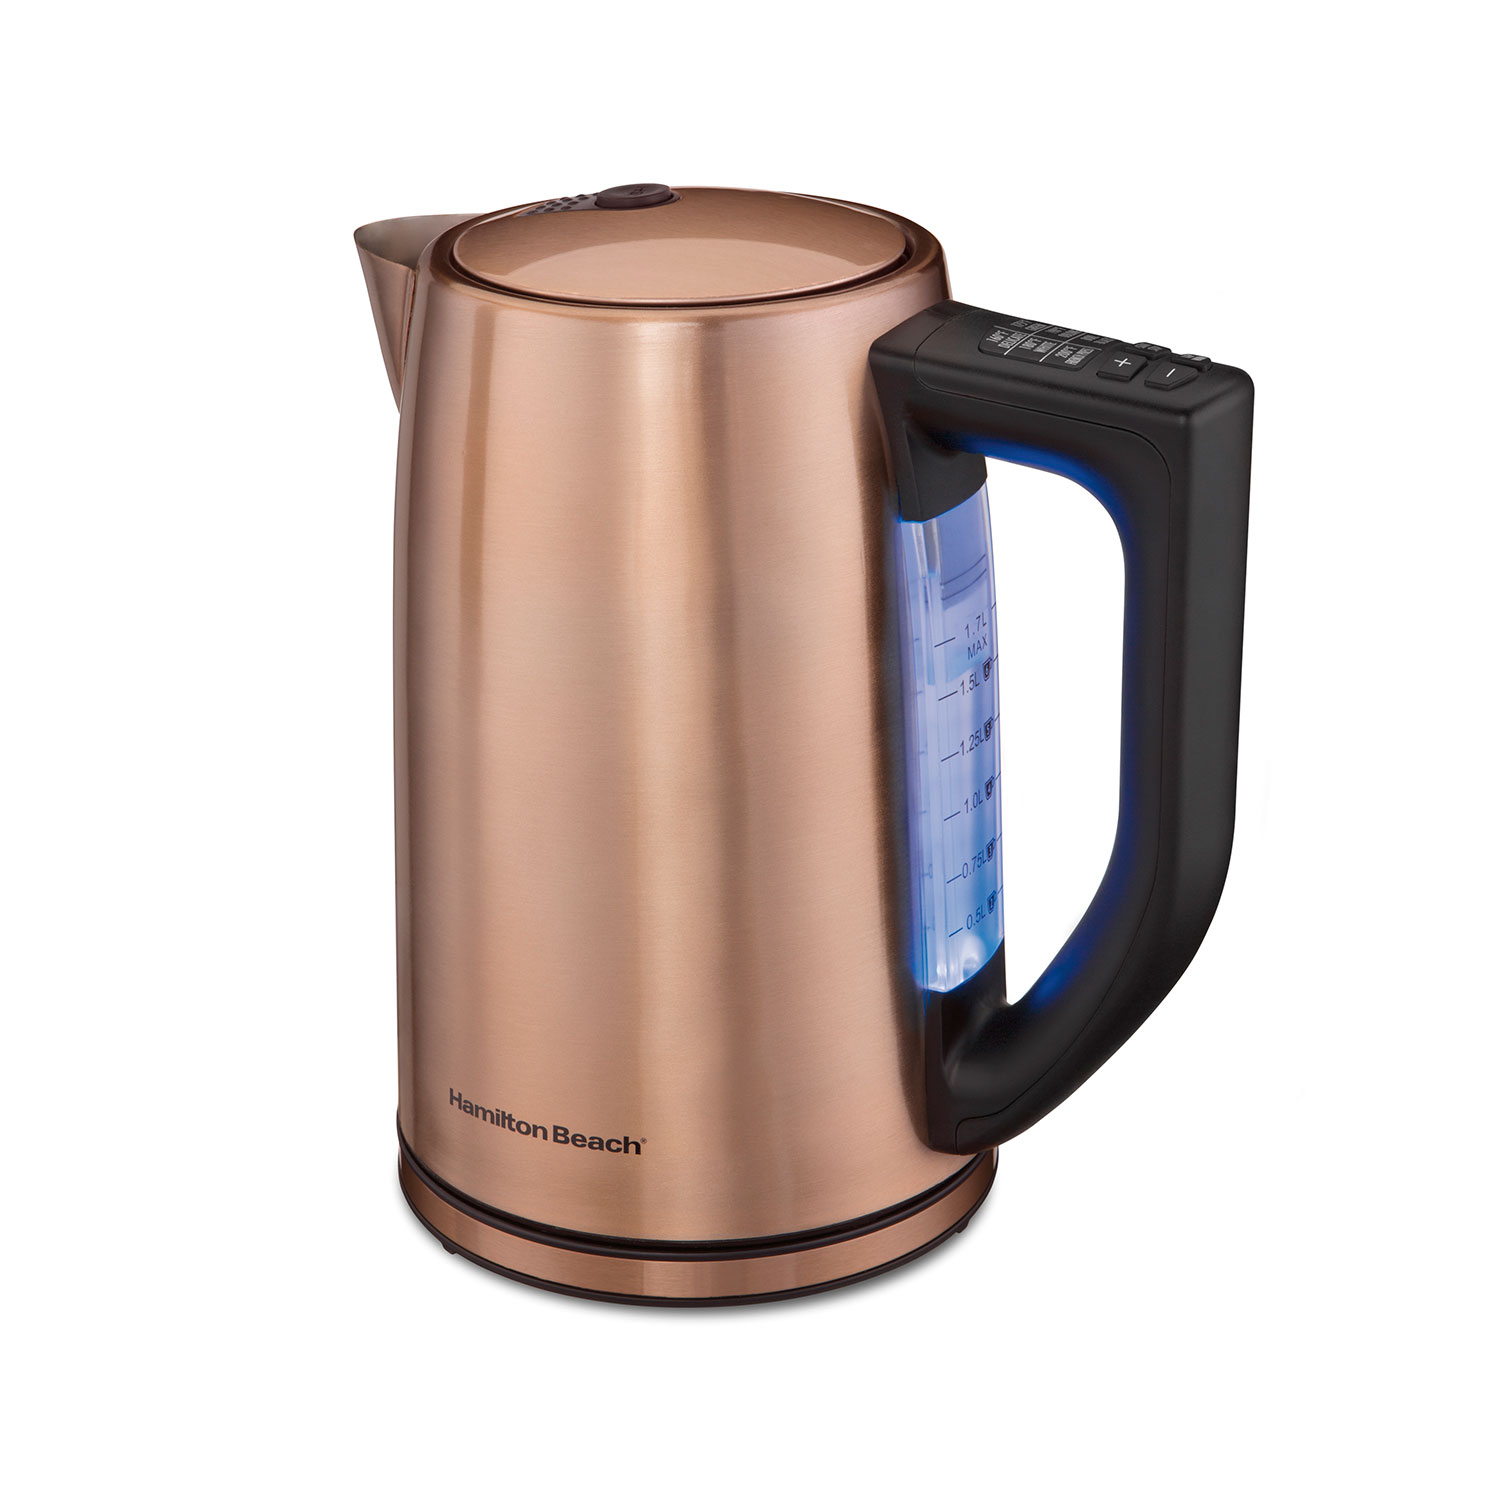 Copper Finish 1.7 Liter Variable Temperature Kettle (41026)